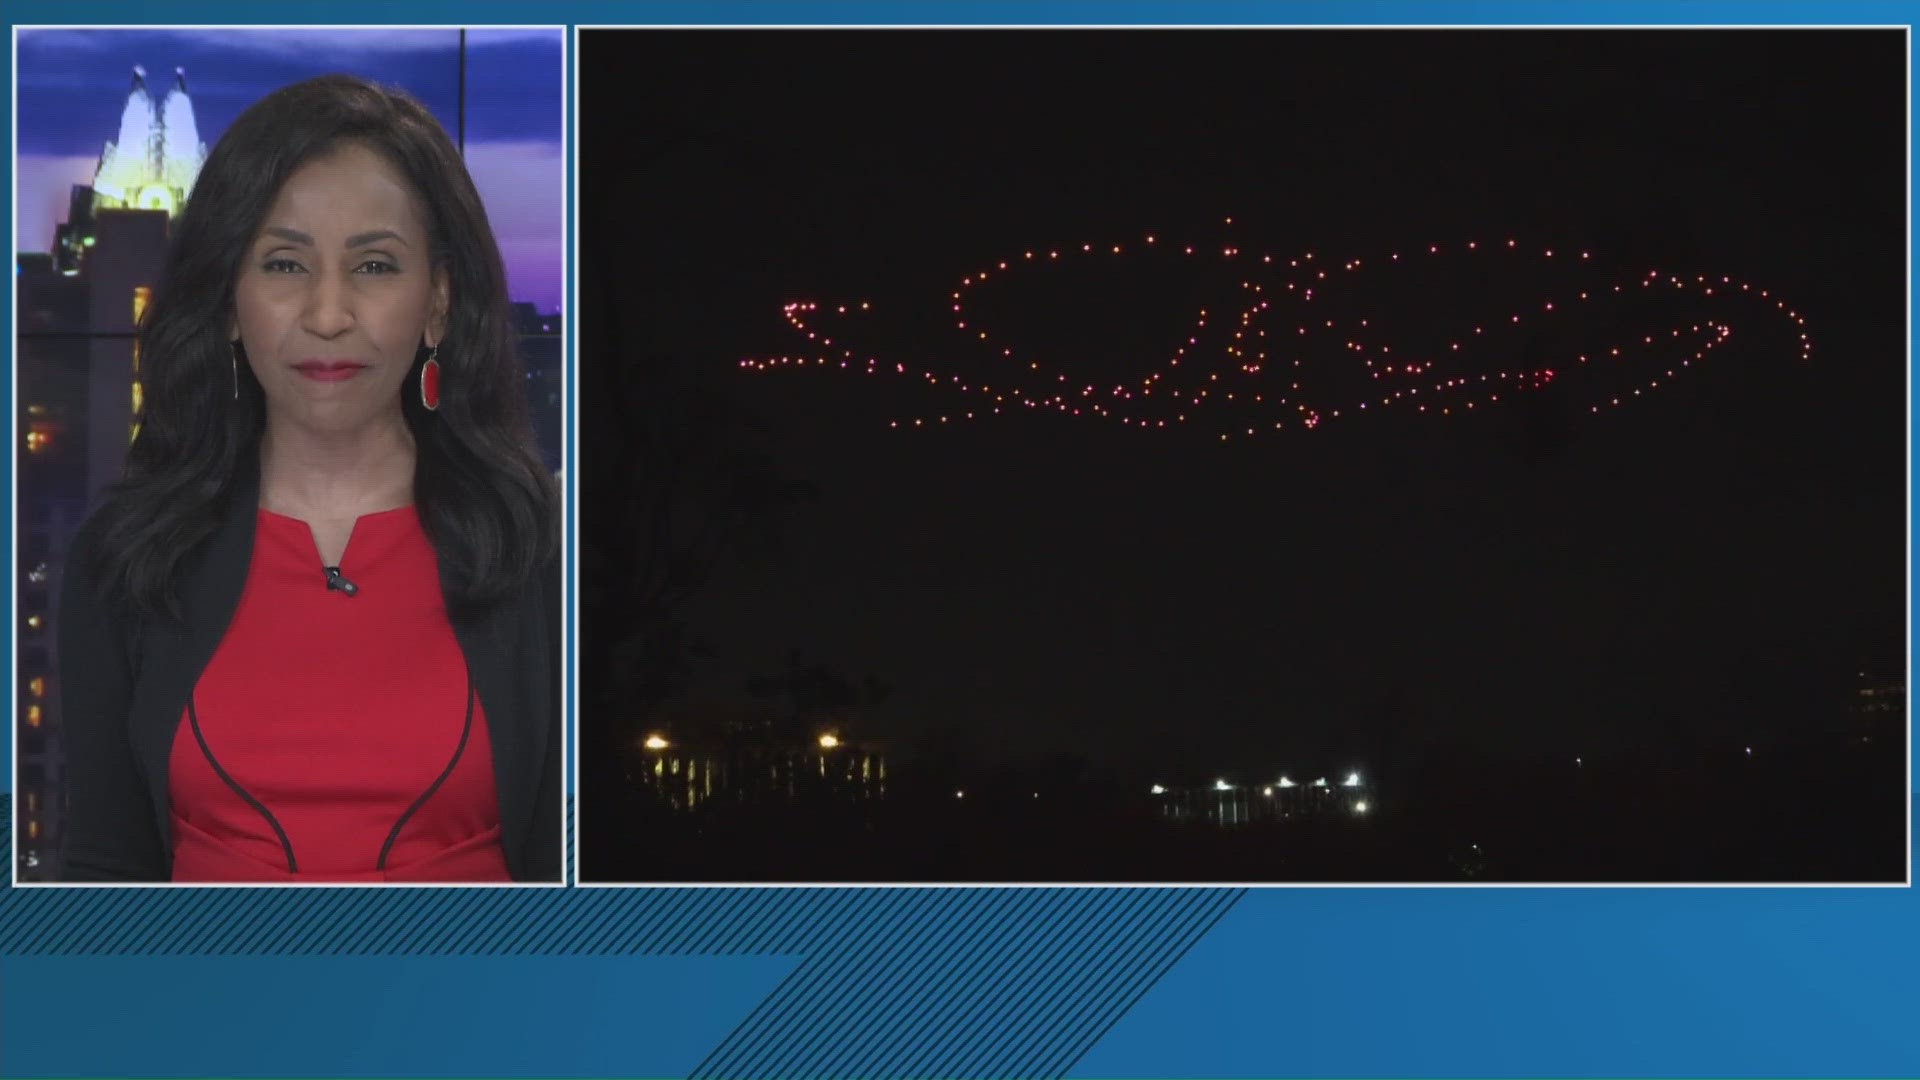 Drones lit up the sky over Downtown Austin on Tuesday night. The show was partially generated by AI.